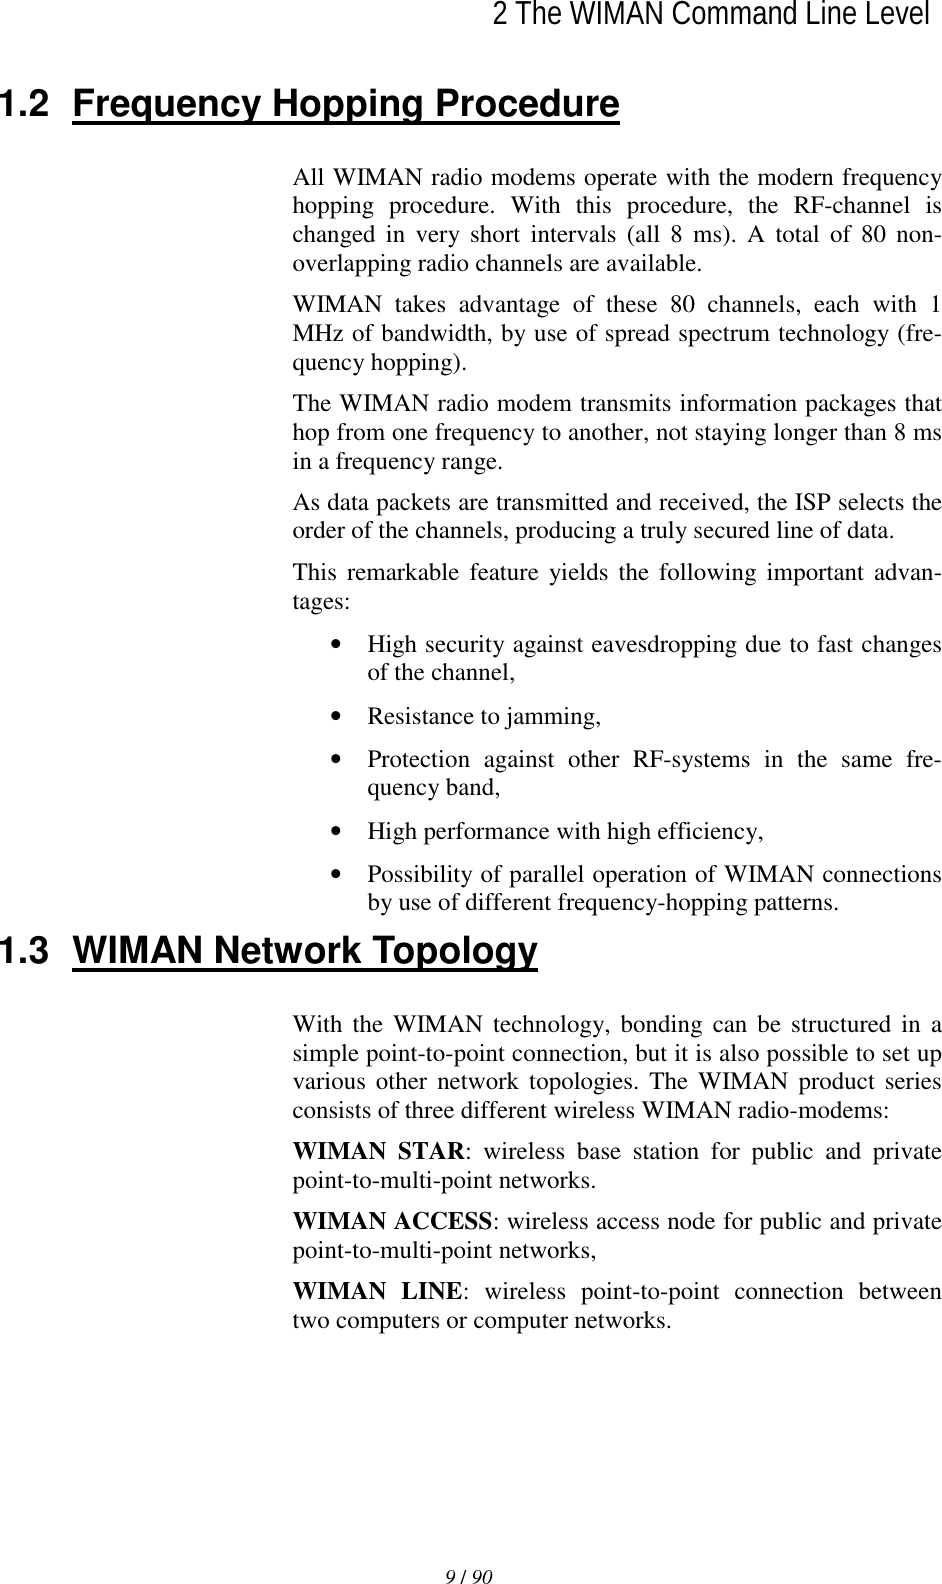   2 The WIMAN Command Line Level9 / 90l1.2  Frequency Hopping Procedure All WIMAN radio modems operate with the modern frequency hopping procedure. With this procedure, the RF-channel is changed in very short intervals (all 8 ms). A total of 80 non-overlapping radio channels are available. WIMAN takes advantage of these 80 channels, each with 1 MHz of bandwidth, by use of spread spectrum technology (fre-quency hopping). The WIMAN radio modem transmits information packages that hop from one frequency to another, not staying longer than 8 ms in a frequency range. As data packets are transmitted and received, the ISP selects the order of the channels, producing a truly secured line of data. This remarkable feature yields the following important advan-tages: •  High security against eavesdropping due to fast changes of the channel, •  Resistance to jamming, •  Protection against other RF-systems in the same fre-quency band, •  High performance with high efficiency, •  Possibility of parallel operation of WIMAN connections by use of different frequency-hopping patterns. 1.3  WIMAN Network Topology With the WIMAN technology, bonding can be structured in a simple point-to-point connection, but it is also possible to set up various other network topologies. The WIMAN product series consists of three different wireless WIMAN radio-modems: WIMAN STAR: wireless base station for public and private point-to-multi-point networks. WIMAN ACCESS: wireless access node for public and private point-to-multi-point networks, WIMAN LINE: wireless point-to-point connection between two computers or computer networks.  